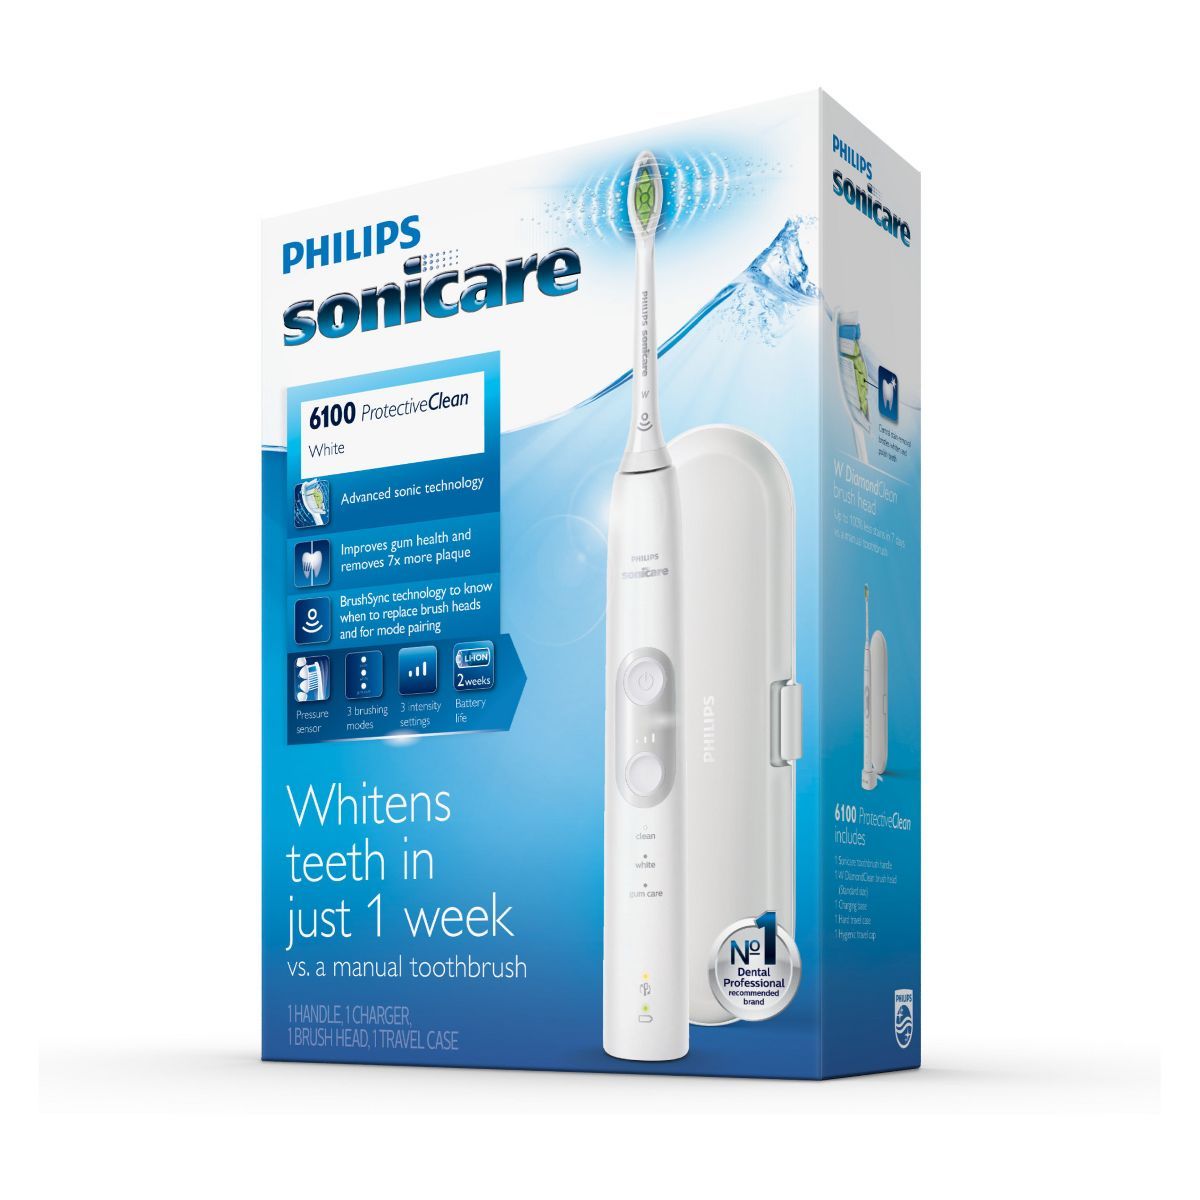 Philips Sonicare ProtectiveClean 6100 Whitening Rechargeable Electric Toothbrush | Target